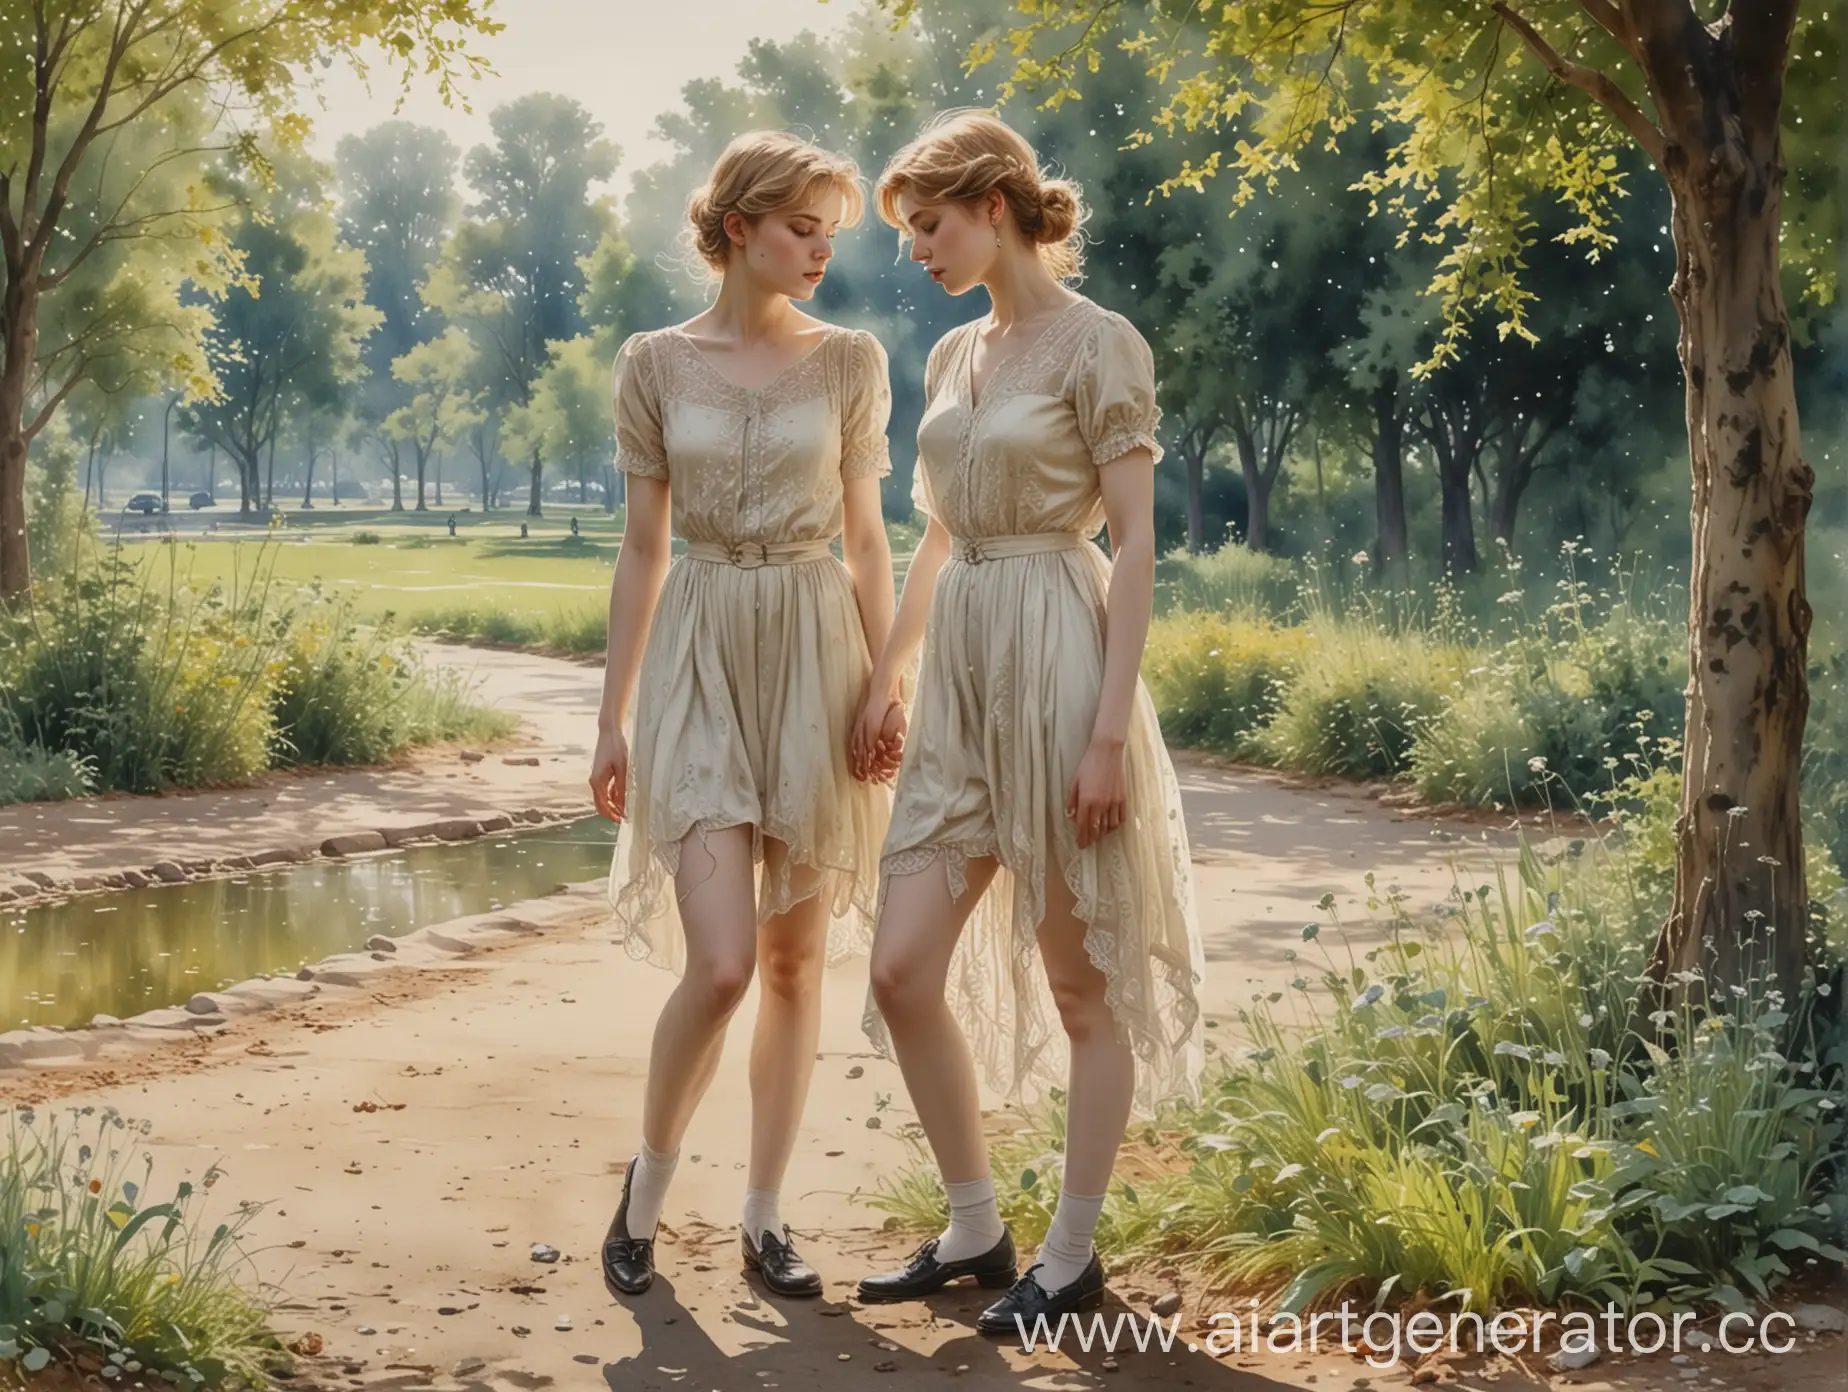 Realistic-Watercolor-Painting-of-Androgynous-Figures-Urinating-in-Filigree-Park